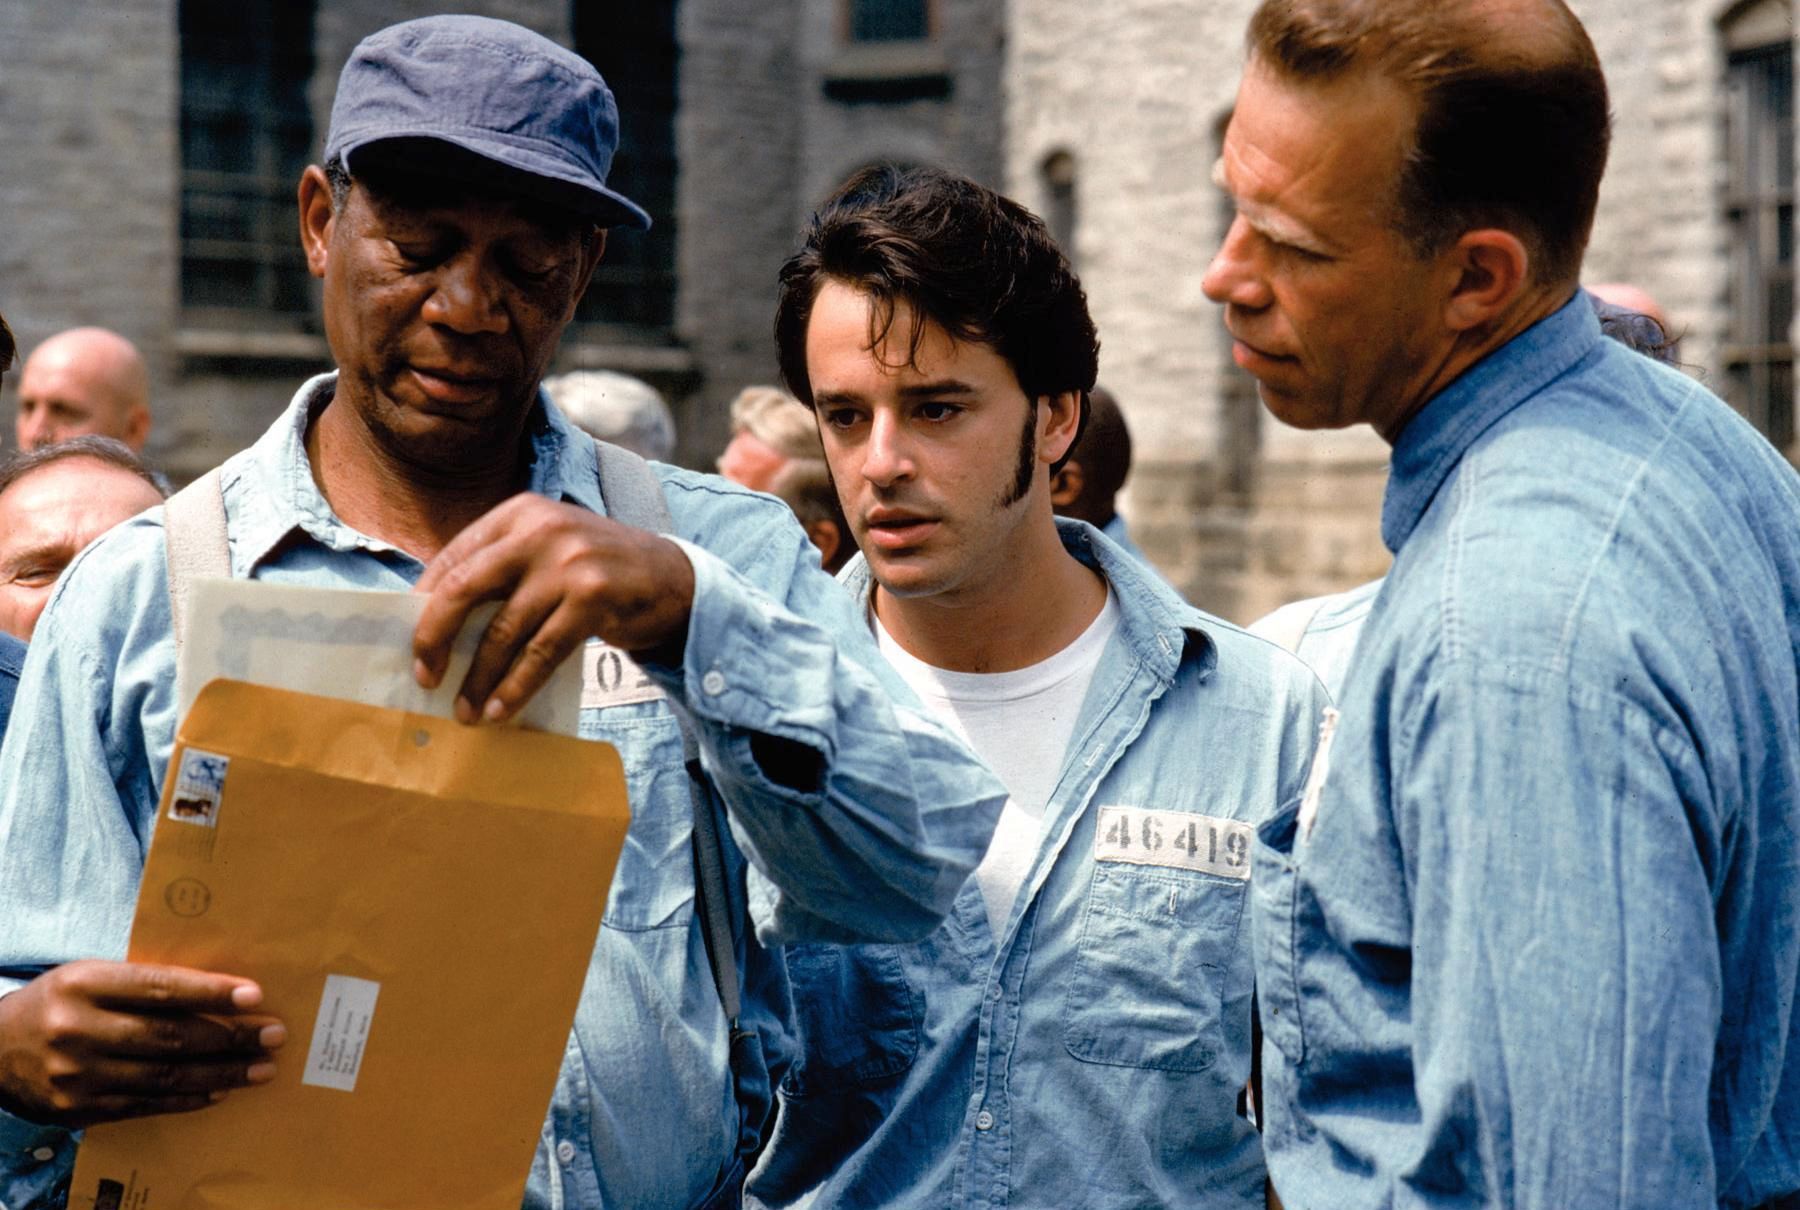 Morgan Freeman, Gil Bellows, and Brian Libby in The Shawshank Redemption (1994)